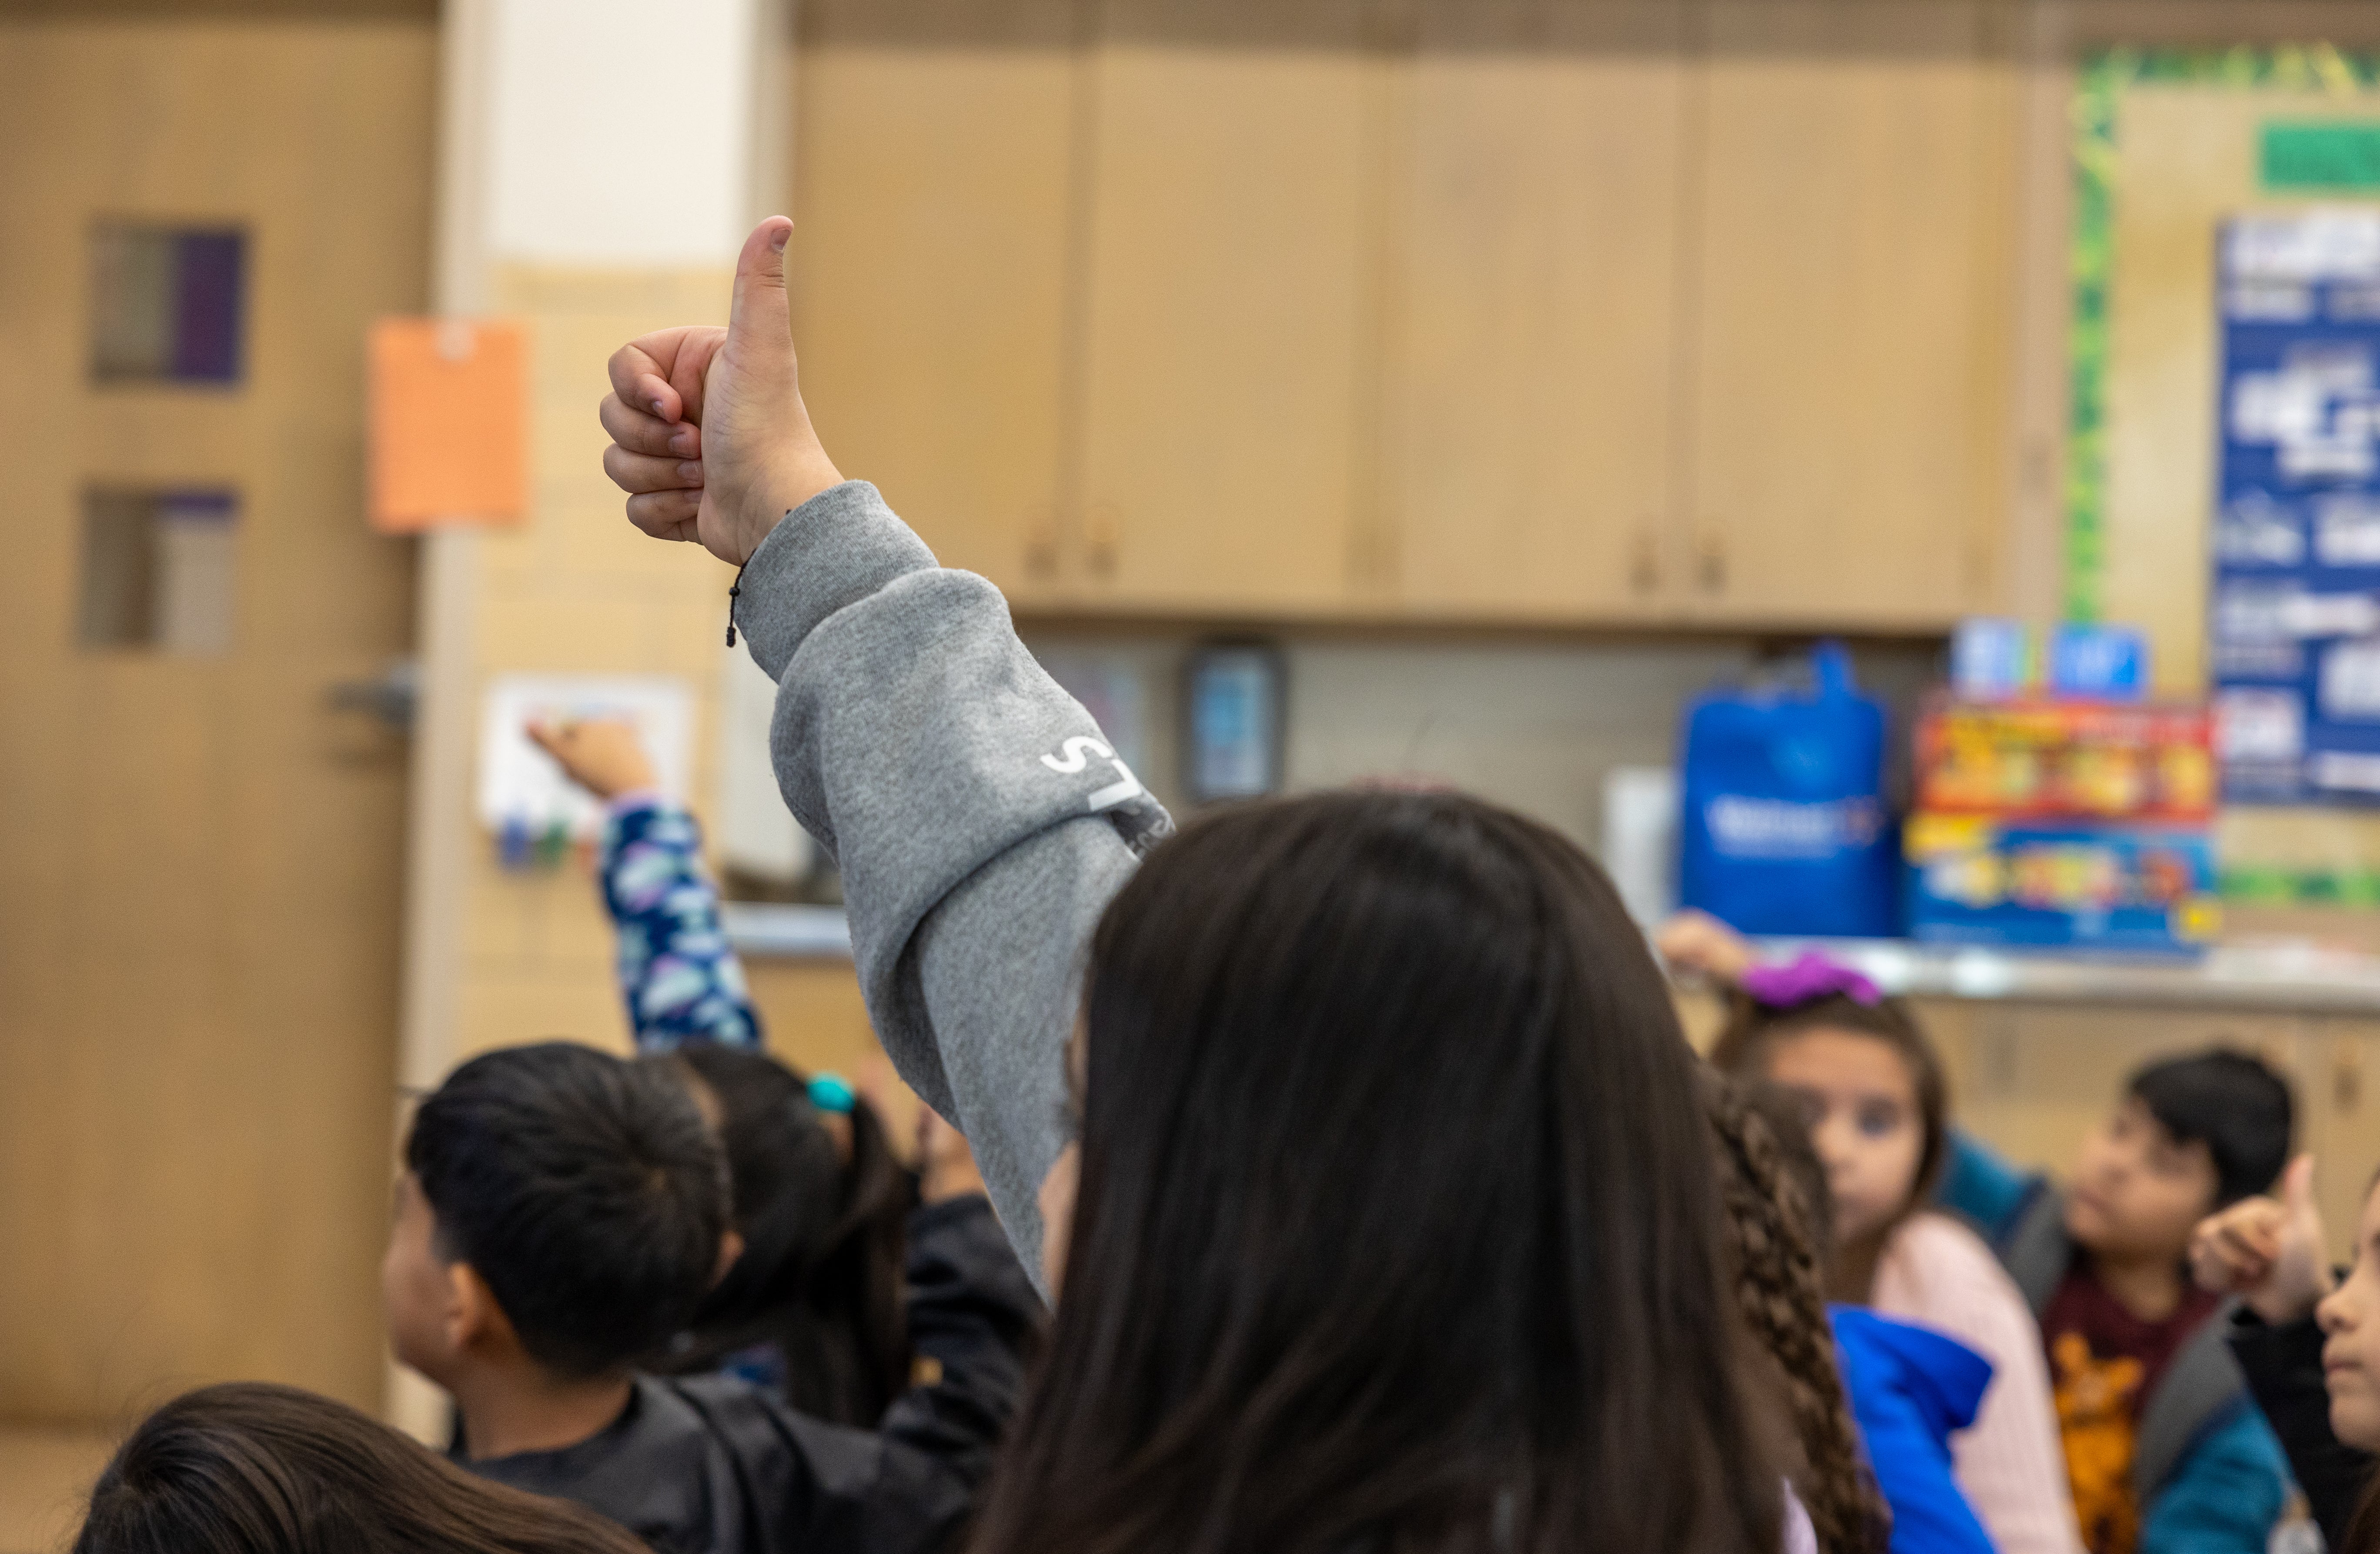 A student puts a thumbs up in the air in response to a question.